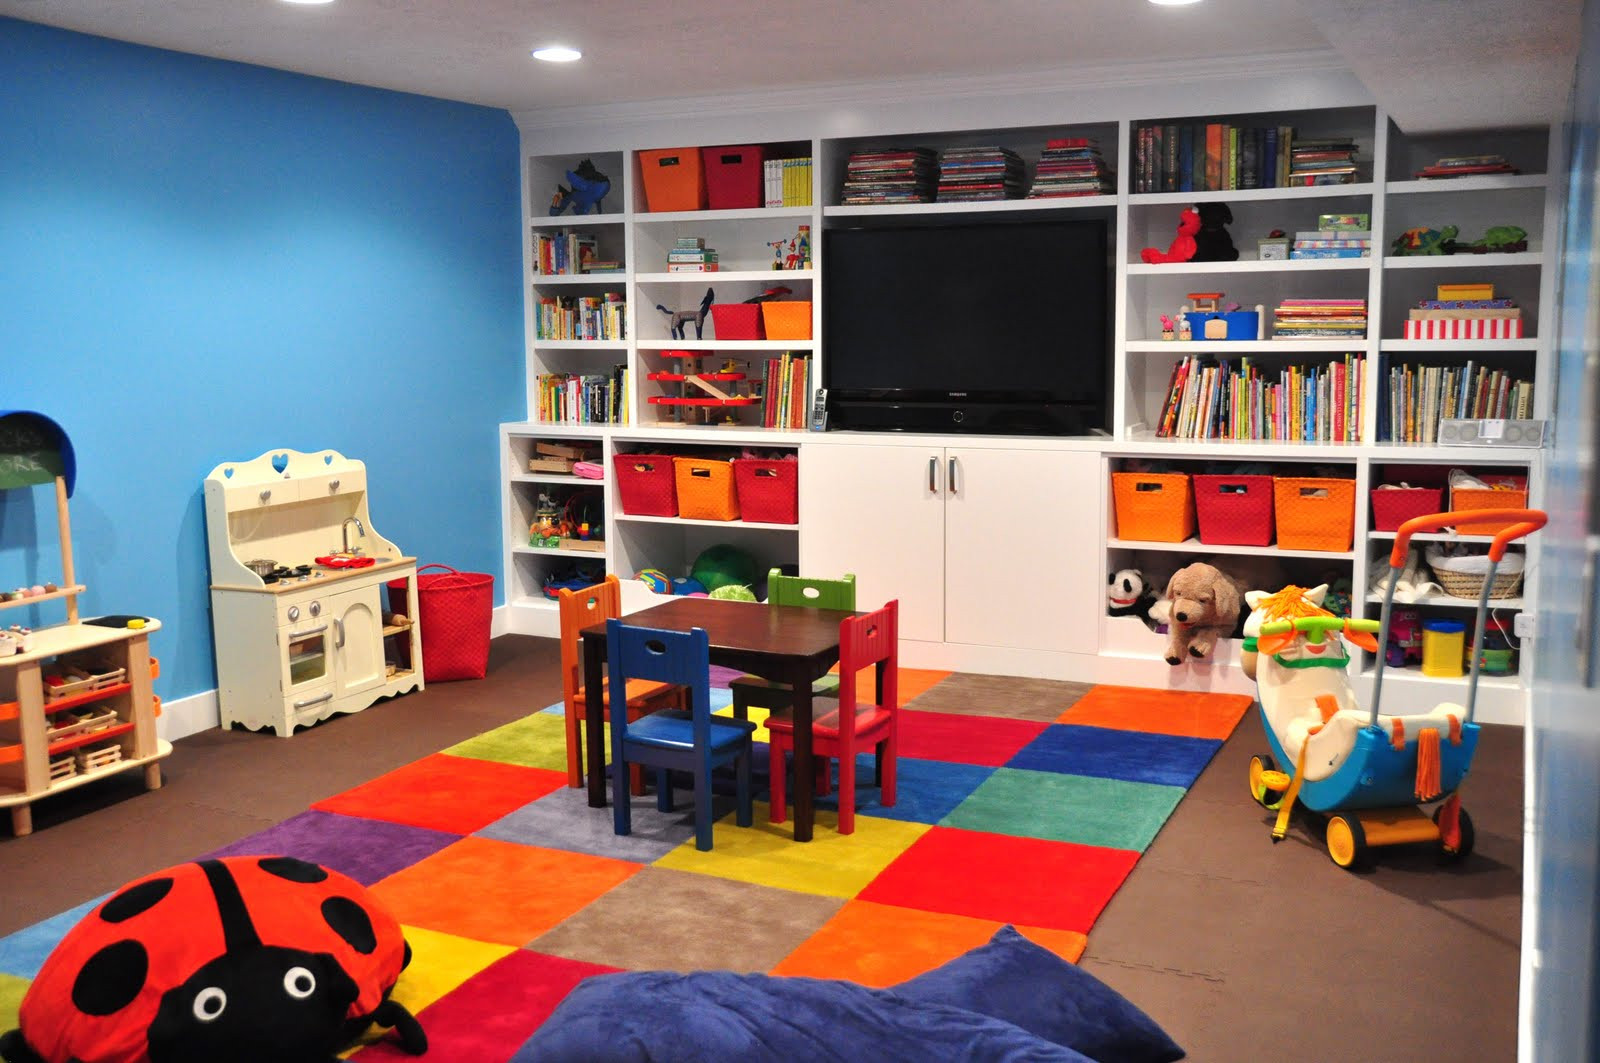 Kids Basement Playrooms
 A Basement Playroom for Kids Making the Most of your Space